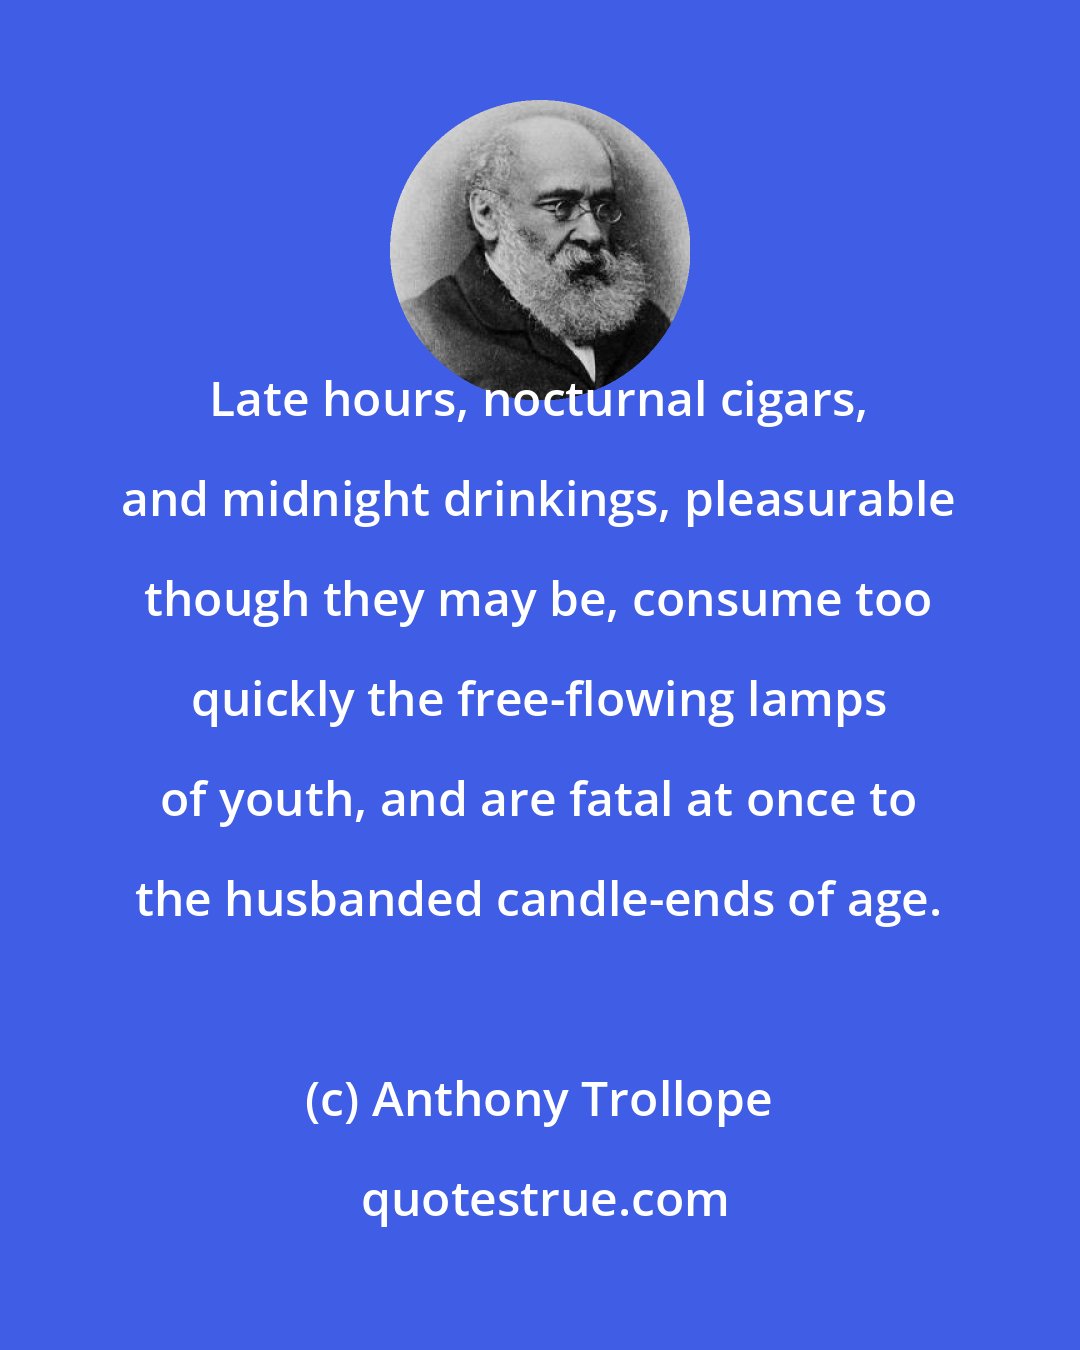 Anthony Trollope: Late hours, nocturnal cigars, and midnight drinkings, pleasurable though they may be, consume too quickly the free-flowing lamps of youth, and are fatal at once to the husbanded candle-ends of age.